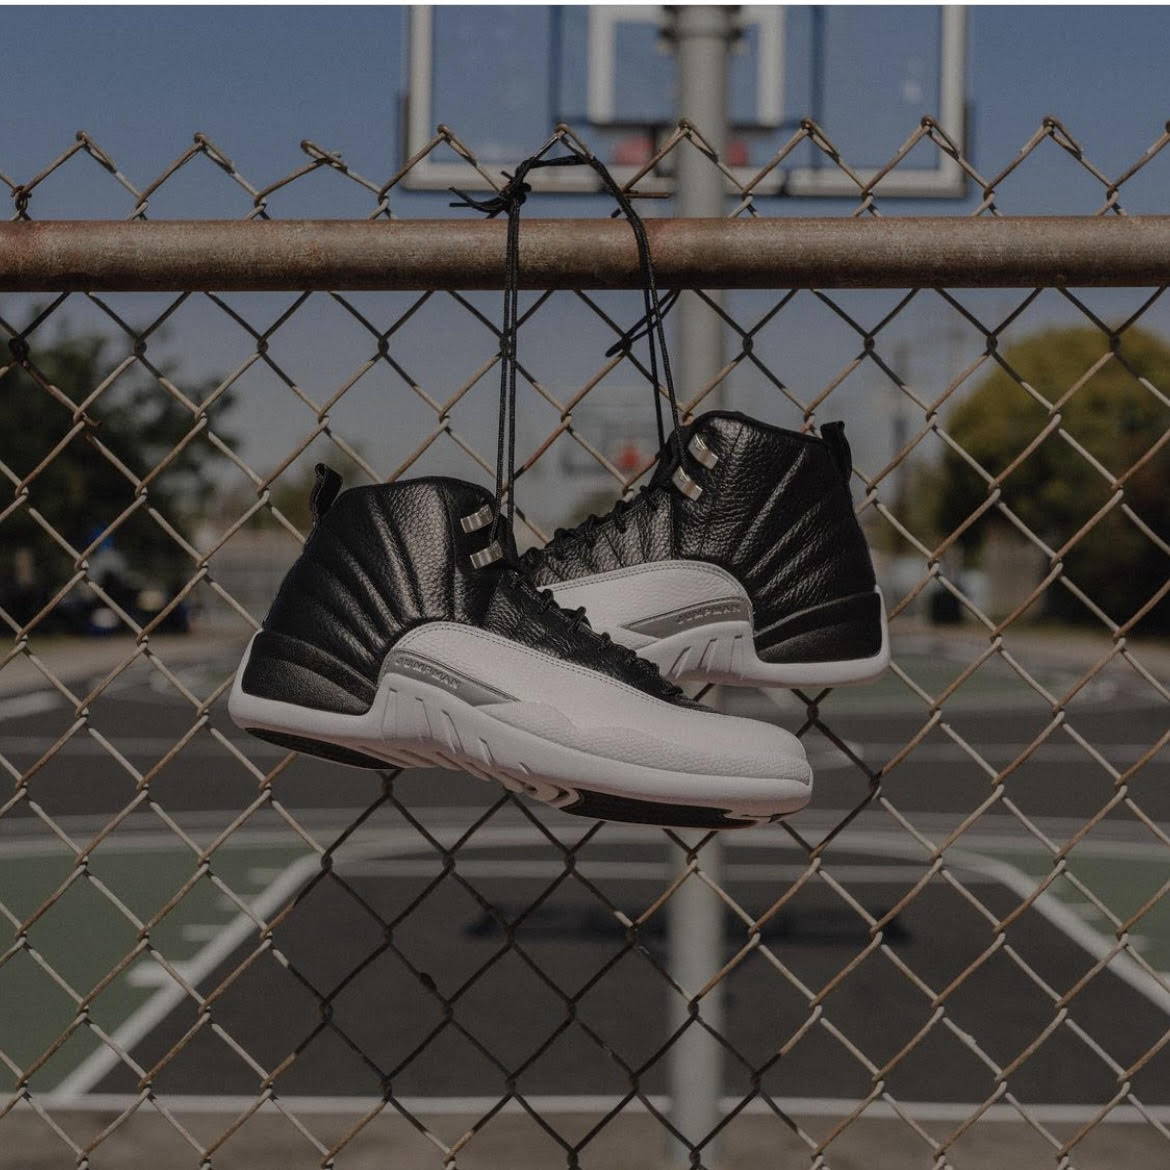 AJ12 playoffs hanging on chainlink fence